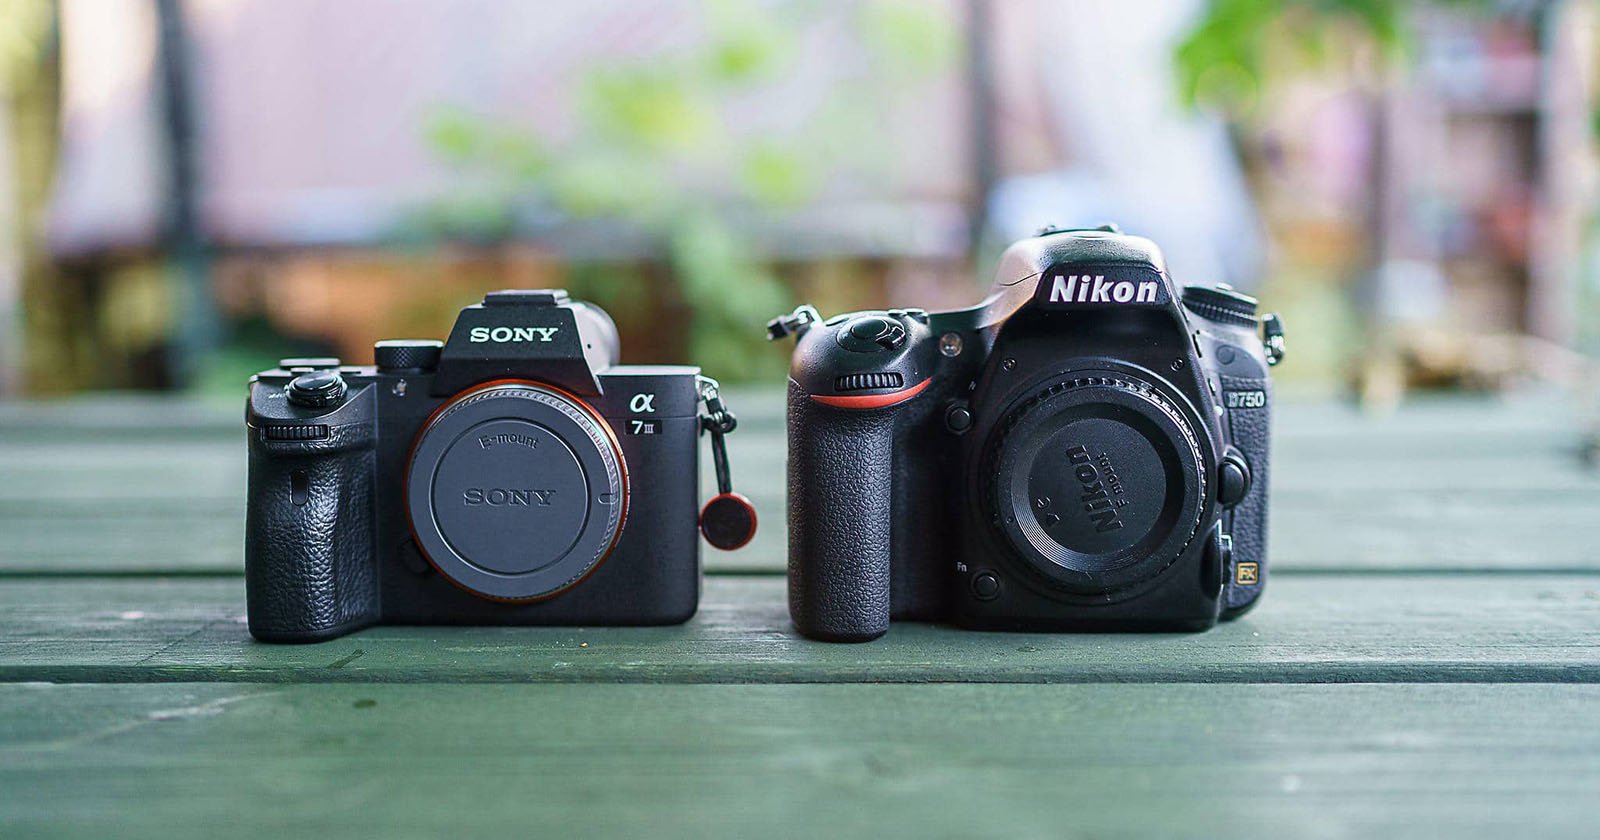 Why I Ditched My Nikon Kit for Sony as a Wedding Photographer